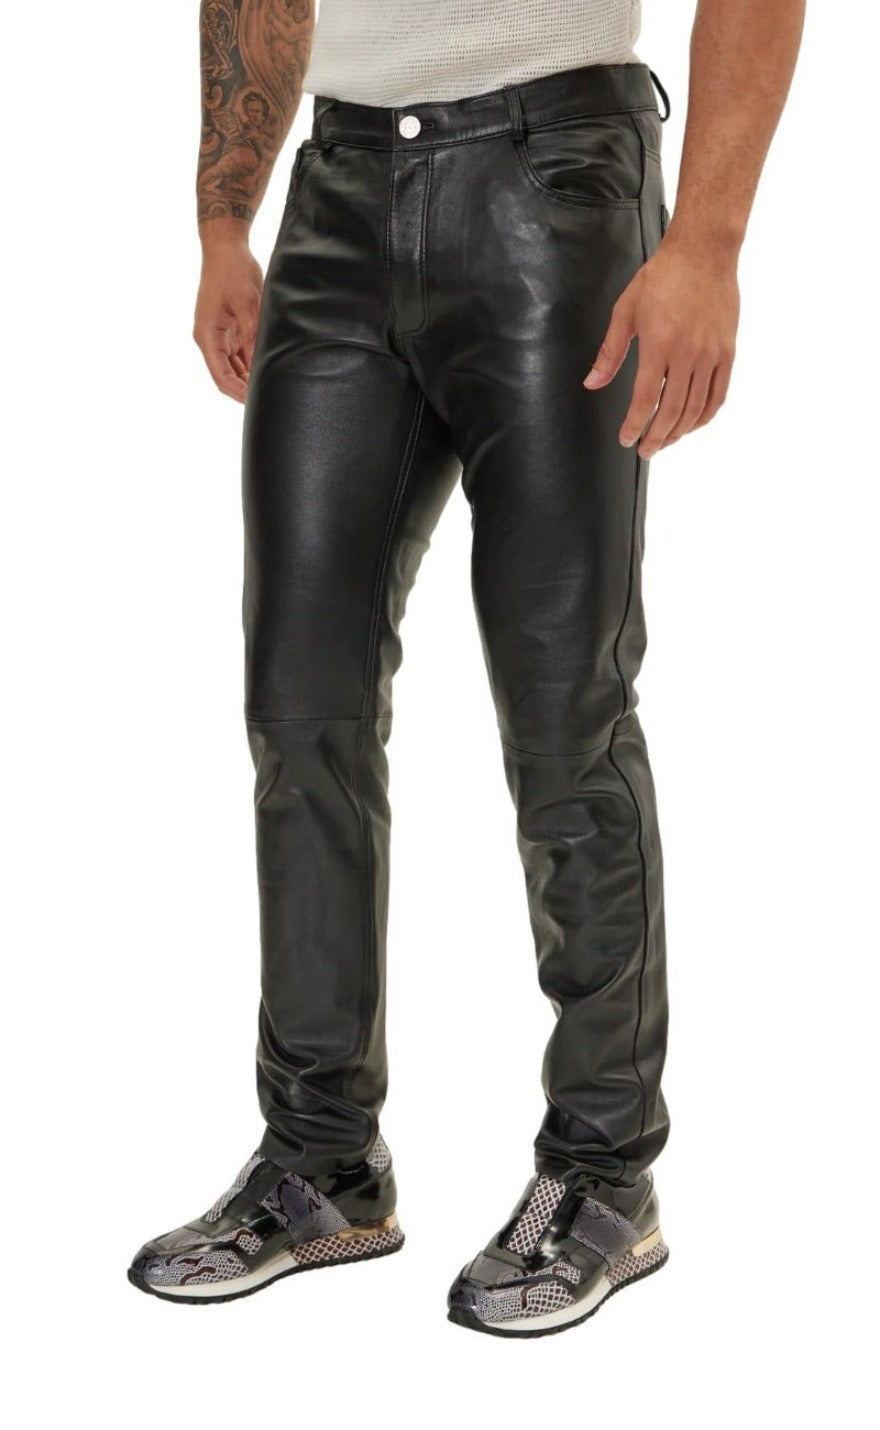 Experience Versatile Style with our Black Leather Cargo Pants-  ChersDelights Leather Apparel